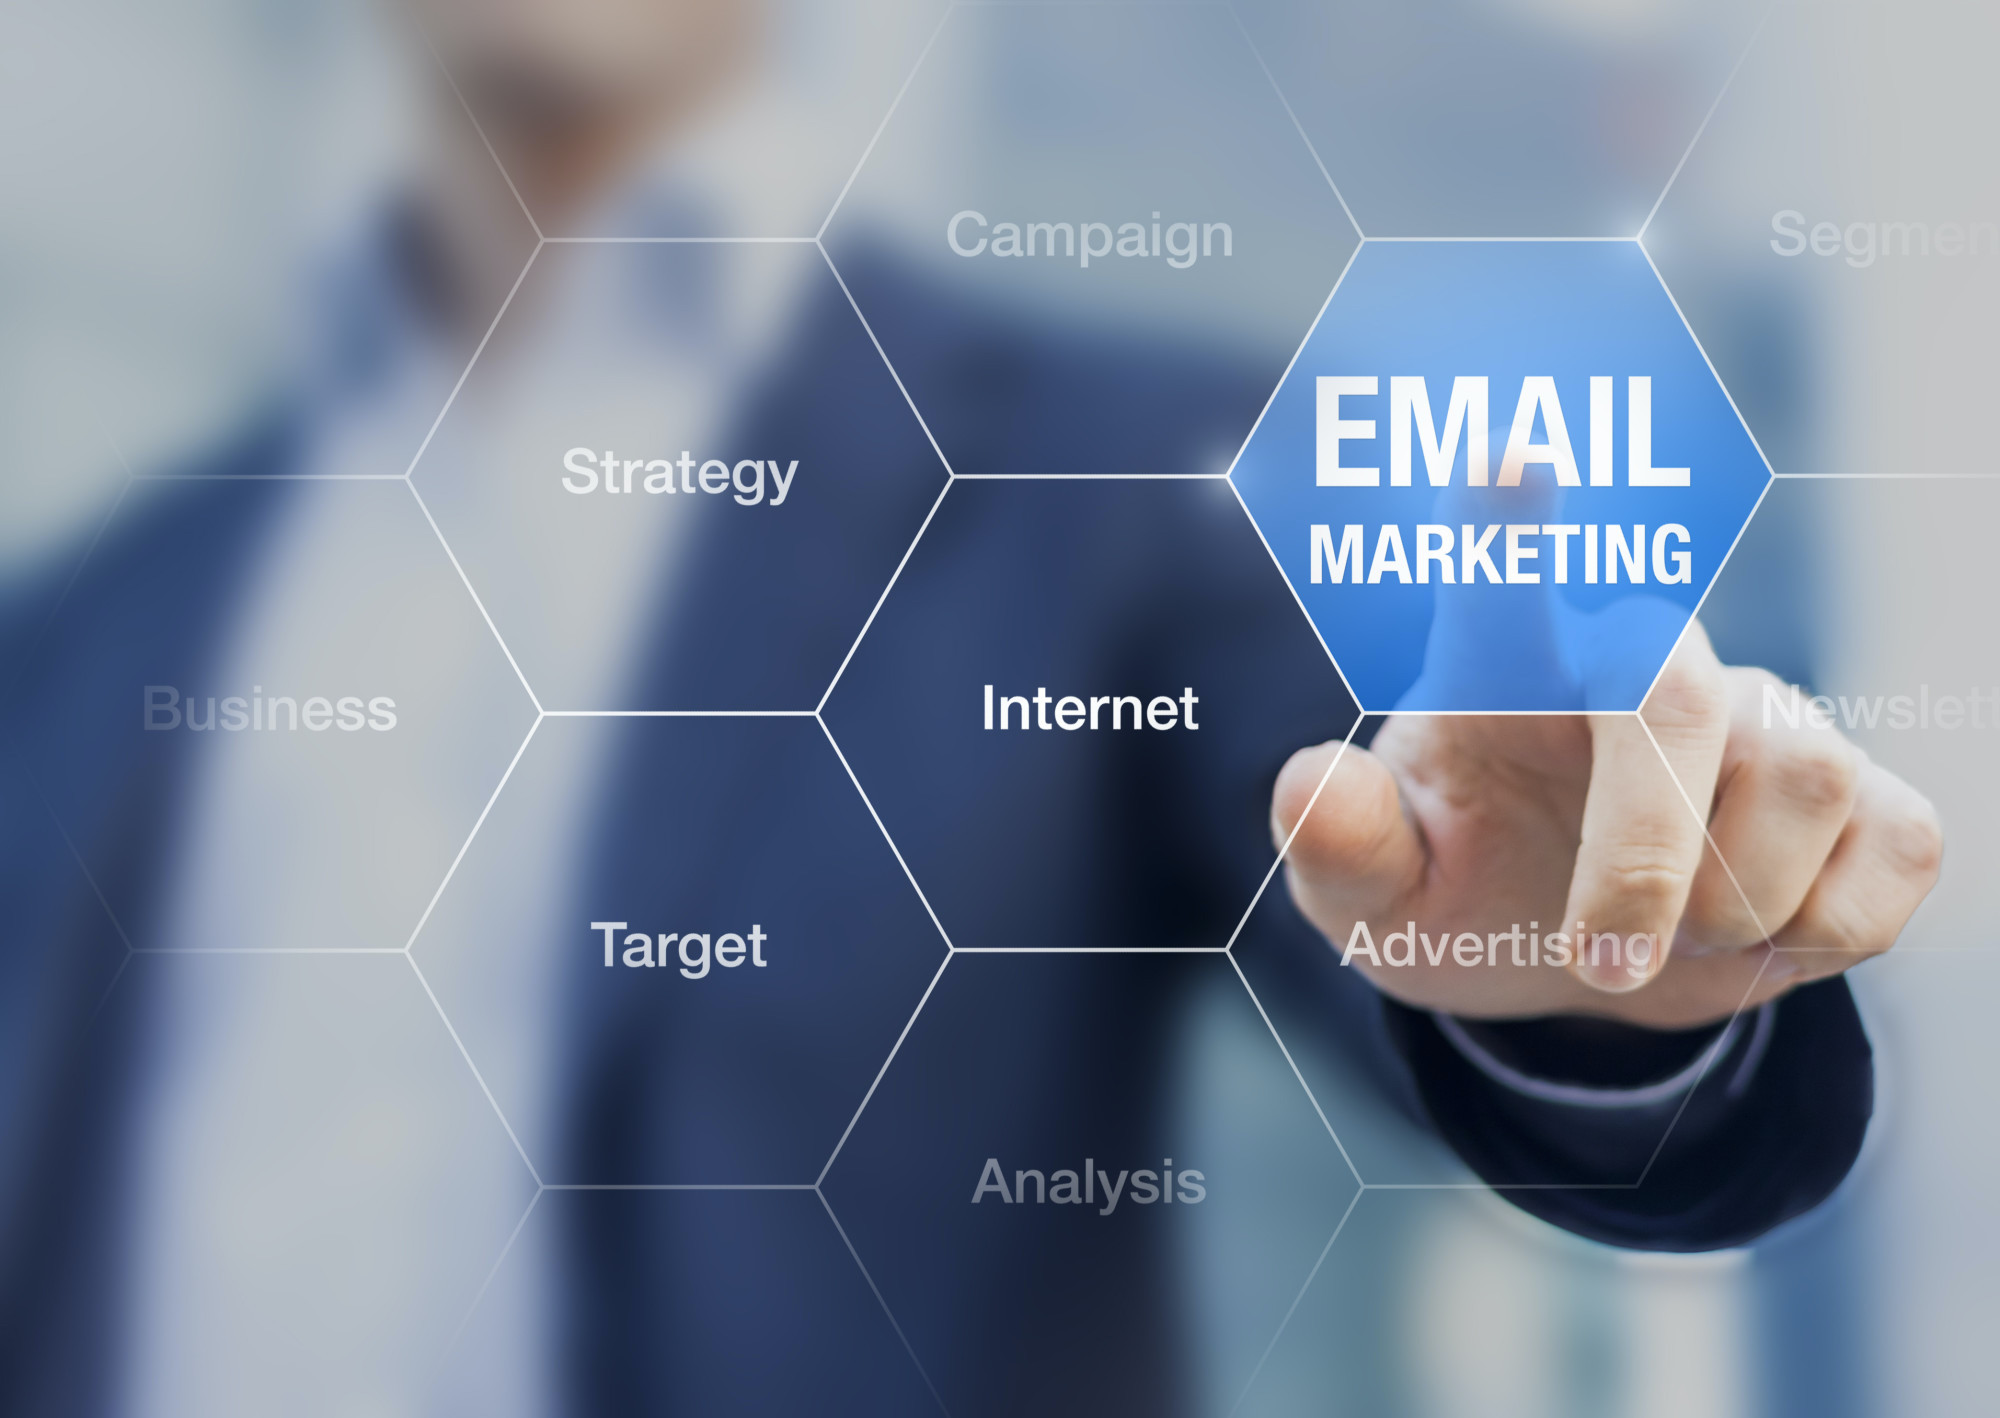 Email Marketing Agency: How To Use the Vertical Response Status Page